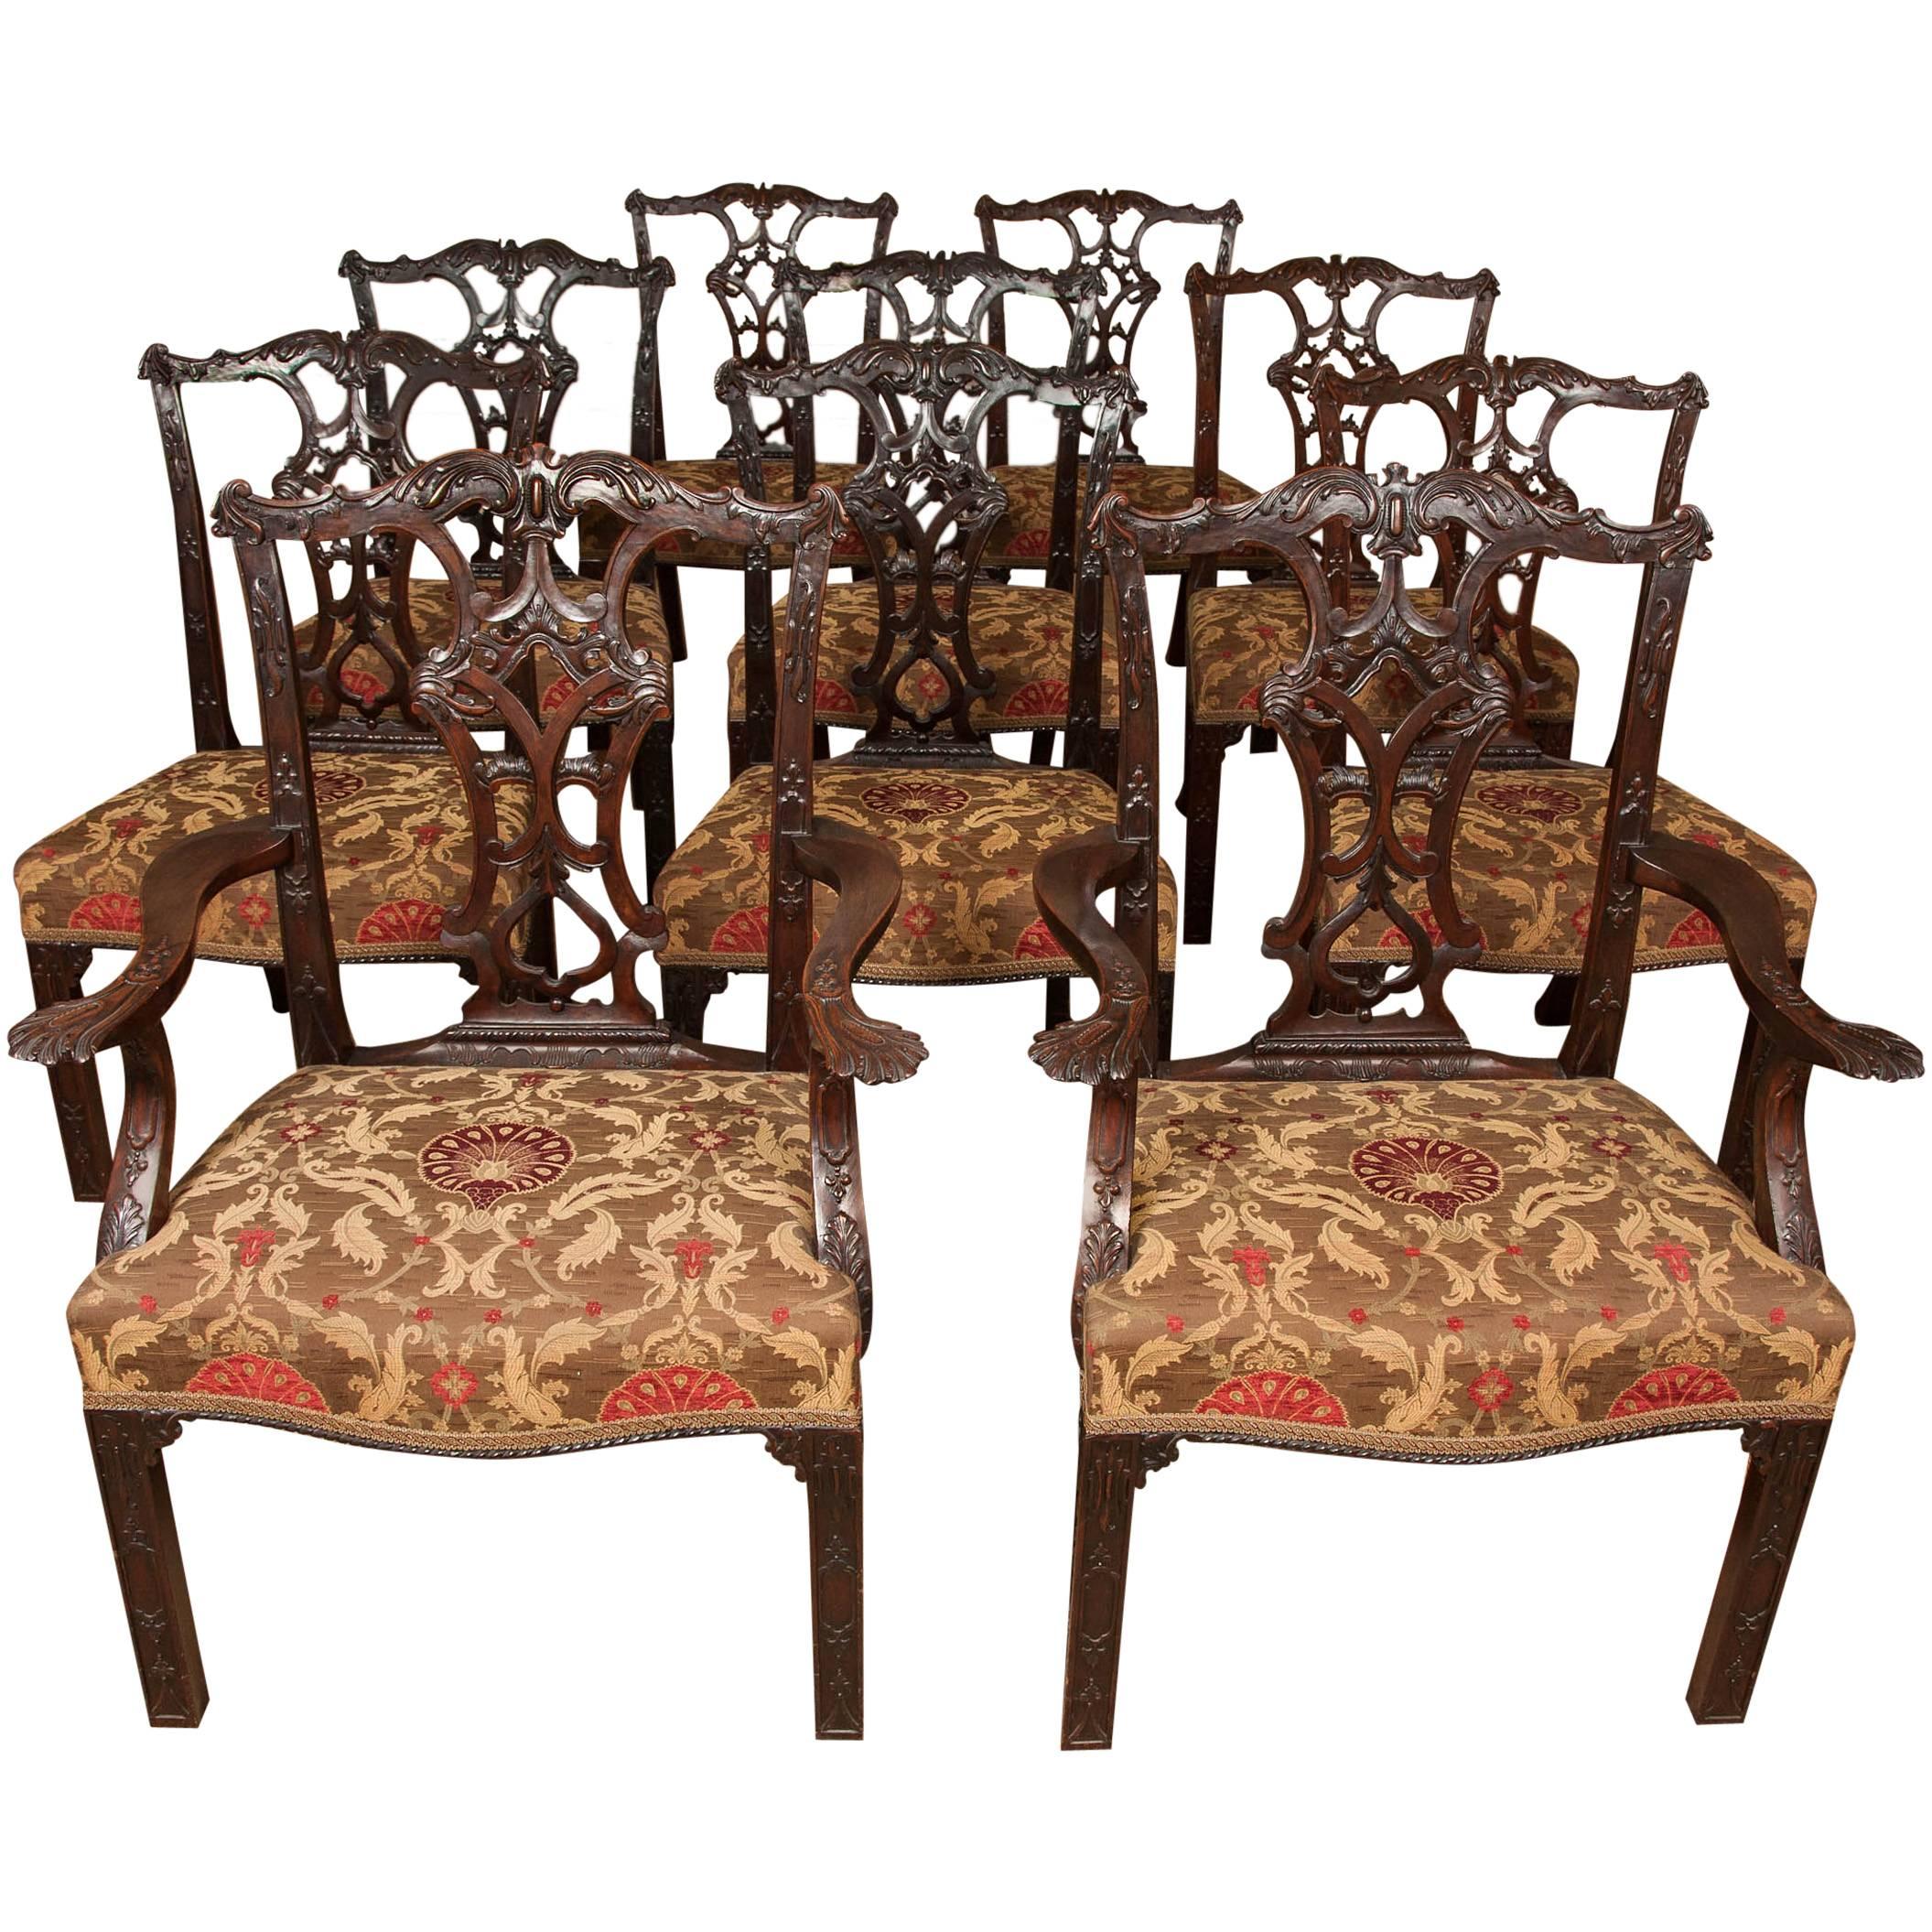 Chippendale style carved Mahogany Dining Chairs, 19th Century, Set of Ten (8+2) For Sale